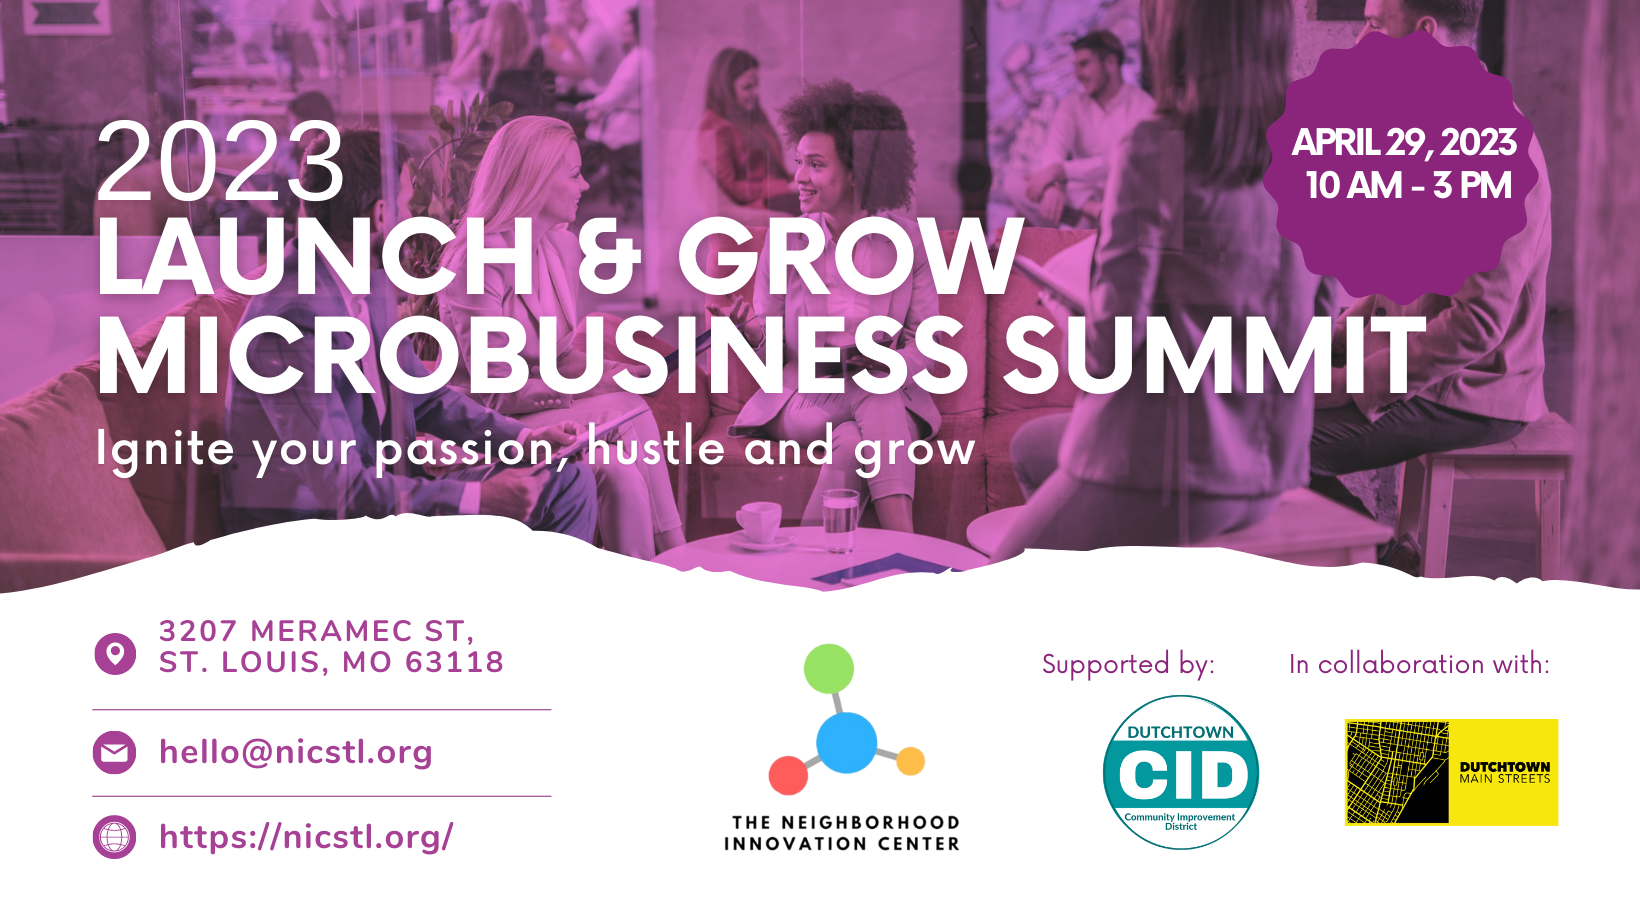 Launch and Grow Microbusiness Summit at the Neighborhood Innovation Center in Dutchtown.